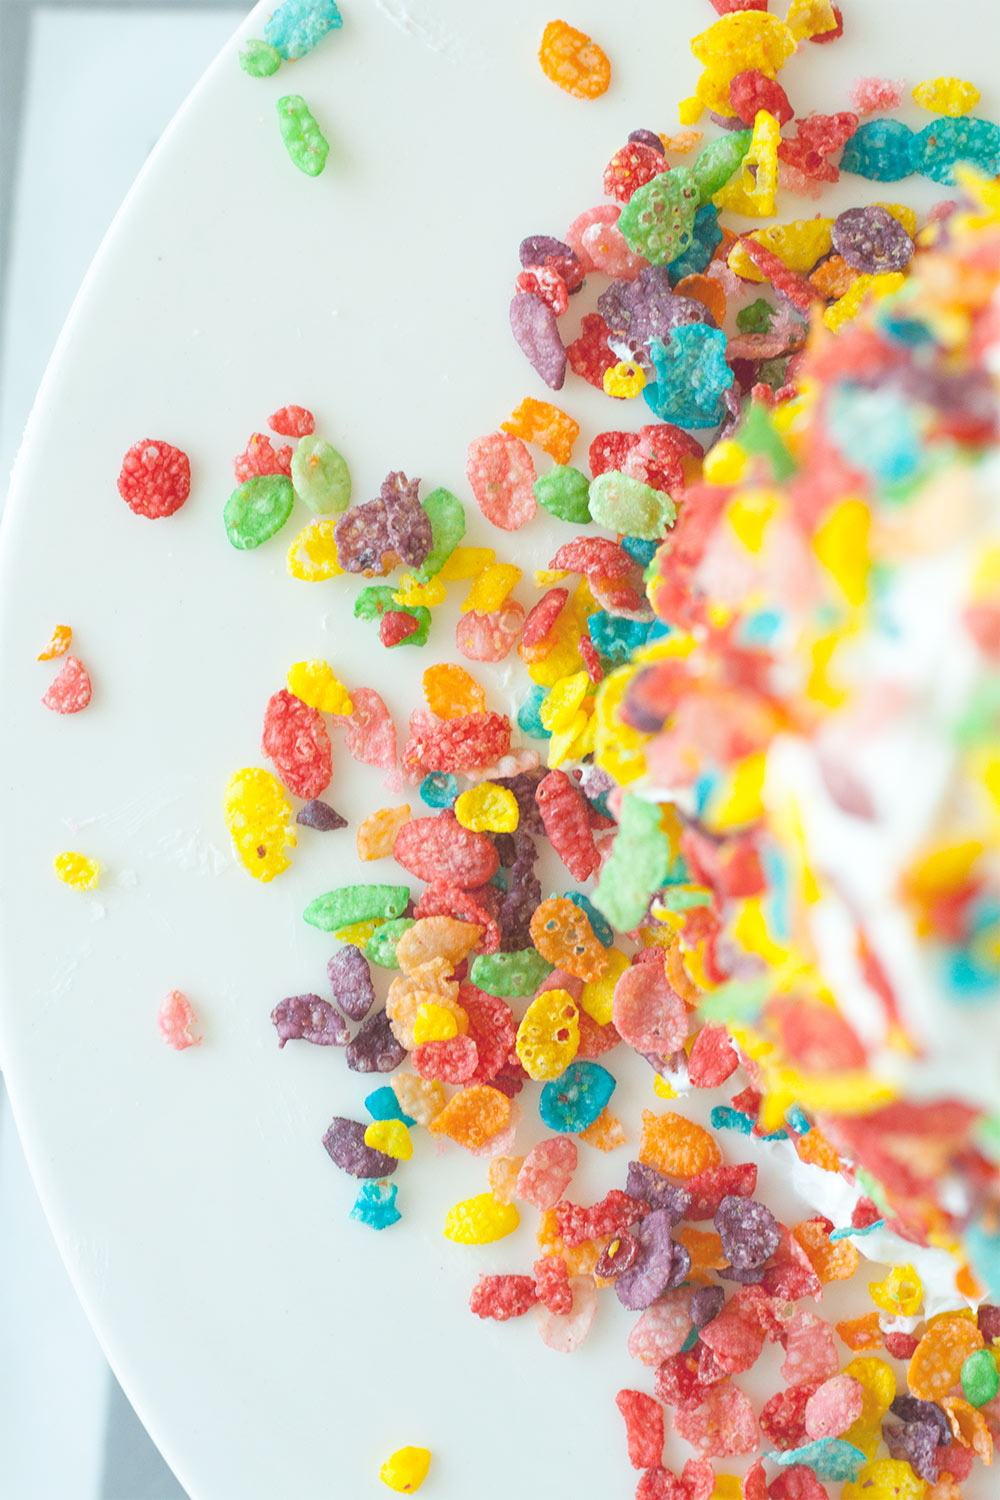 This cake is so party ready it comes with it's own confetti. Strawberry cake, fluffy white frosting, and rainbow breakfast cereal are all you need for this Fruity Pebbles Cake recipe! Pin for later or click through for the recipe.